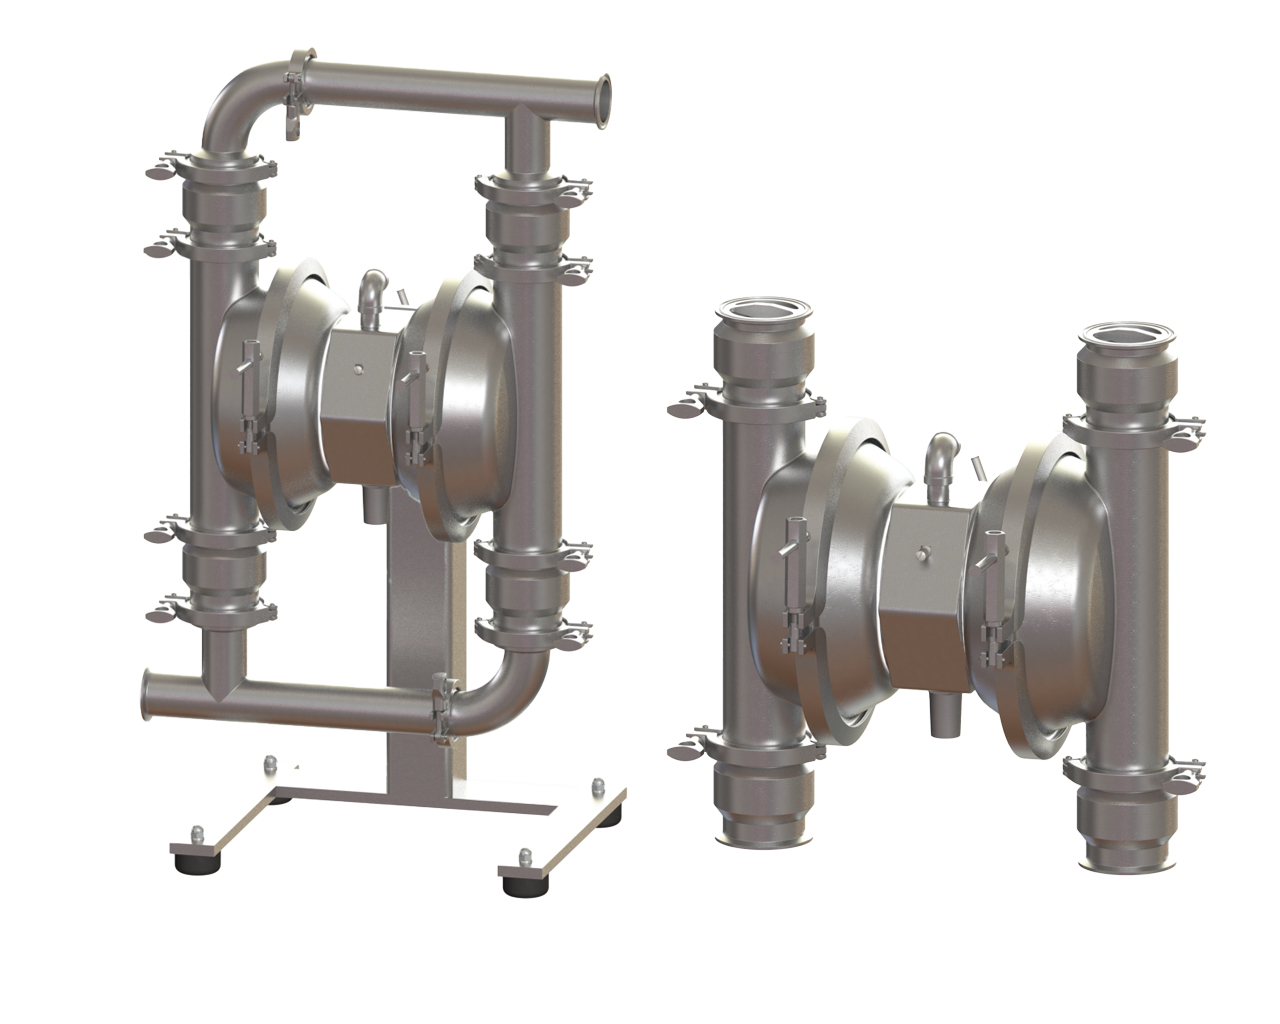 TerySan Stainless Steel Clamped Pumps